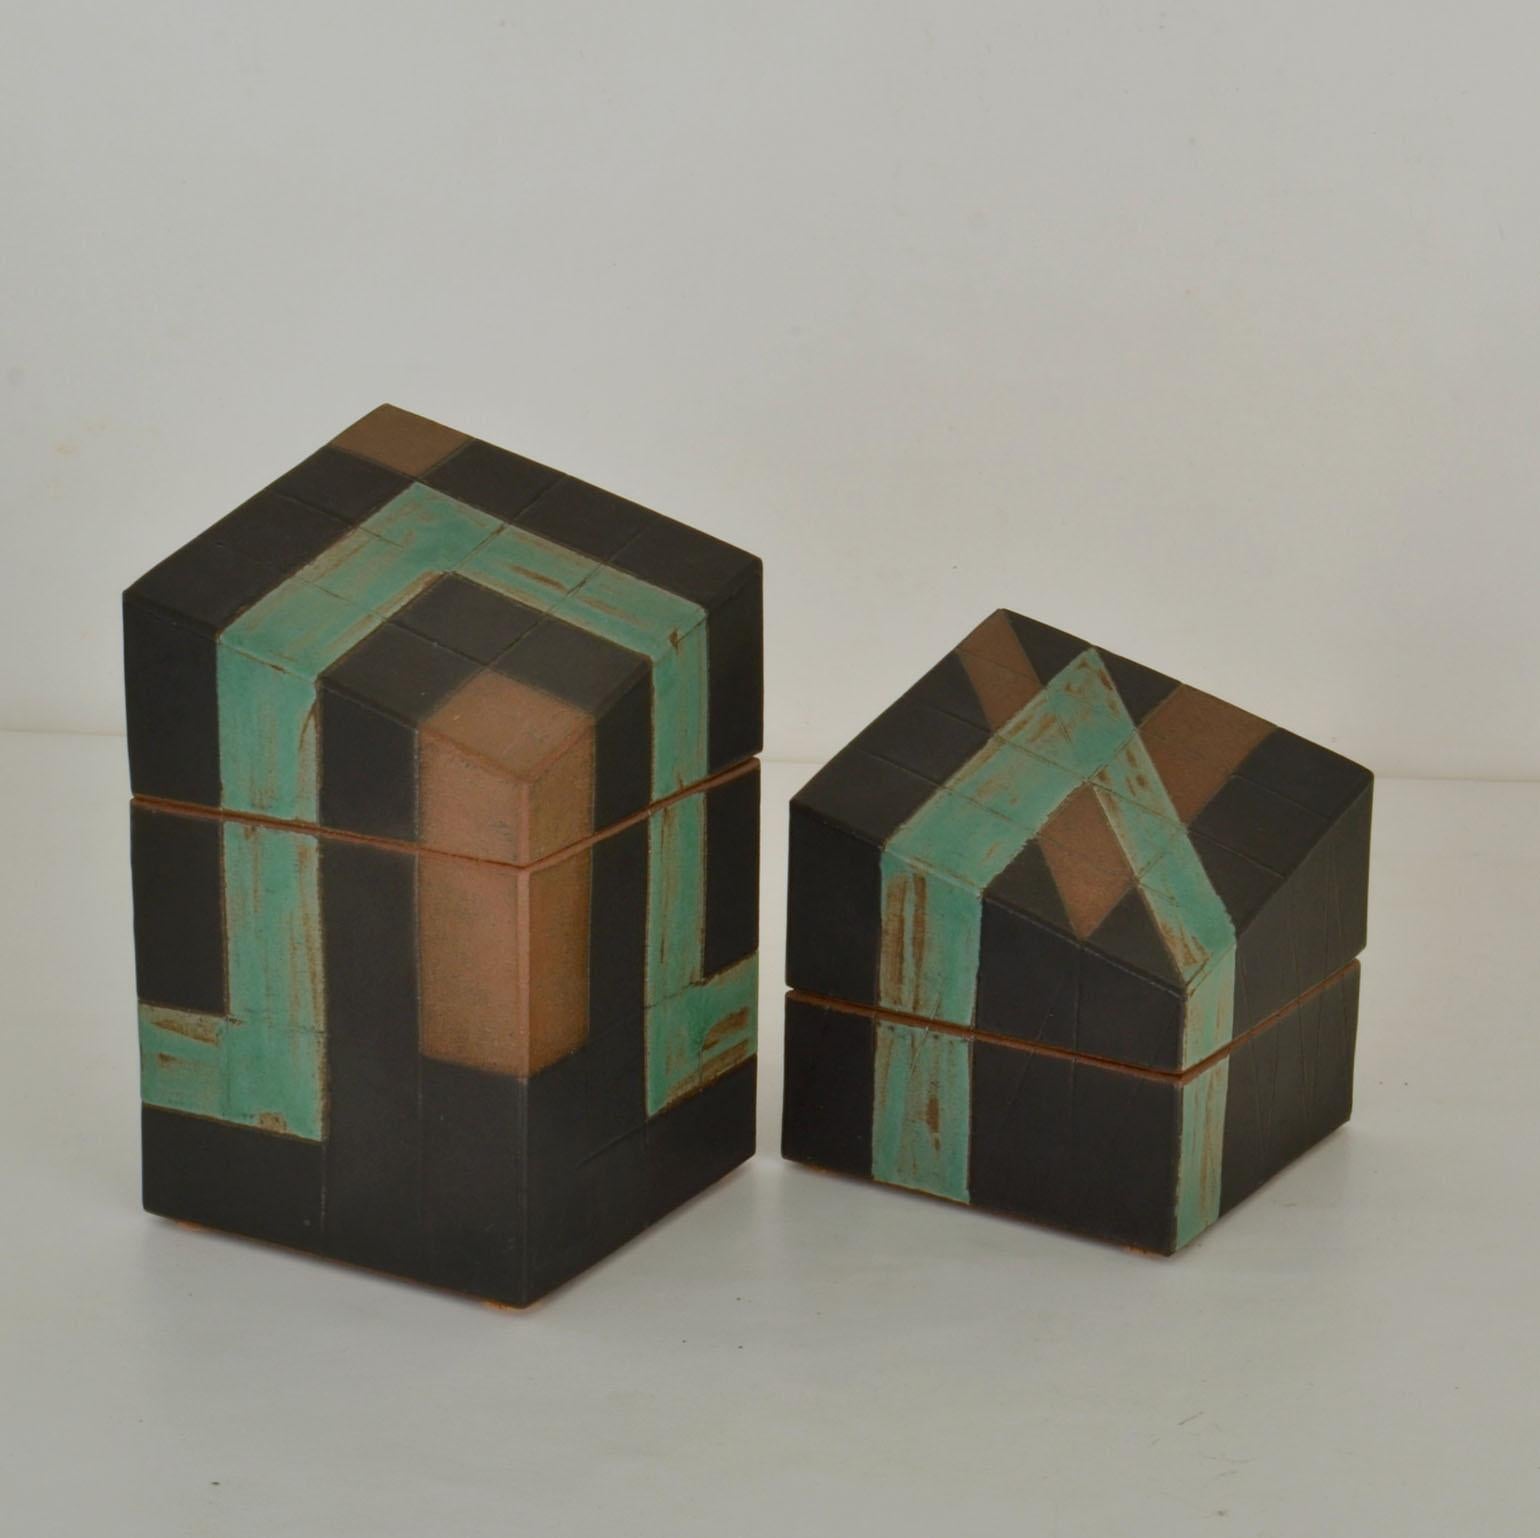 Sculptural square Studio Pottery boxes with slanting tops, signed PS. The geometric pattern in sage green and brown on the black boxes is designed to continue from one box to the other. The lids fit precisely on the bases of the late 20th century